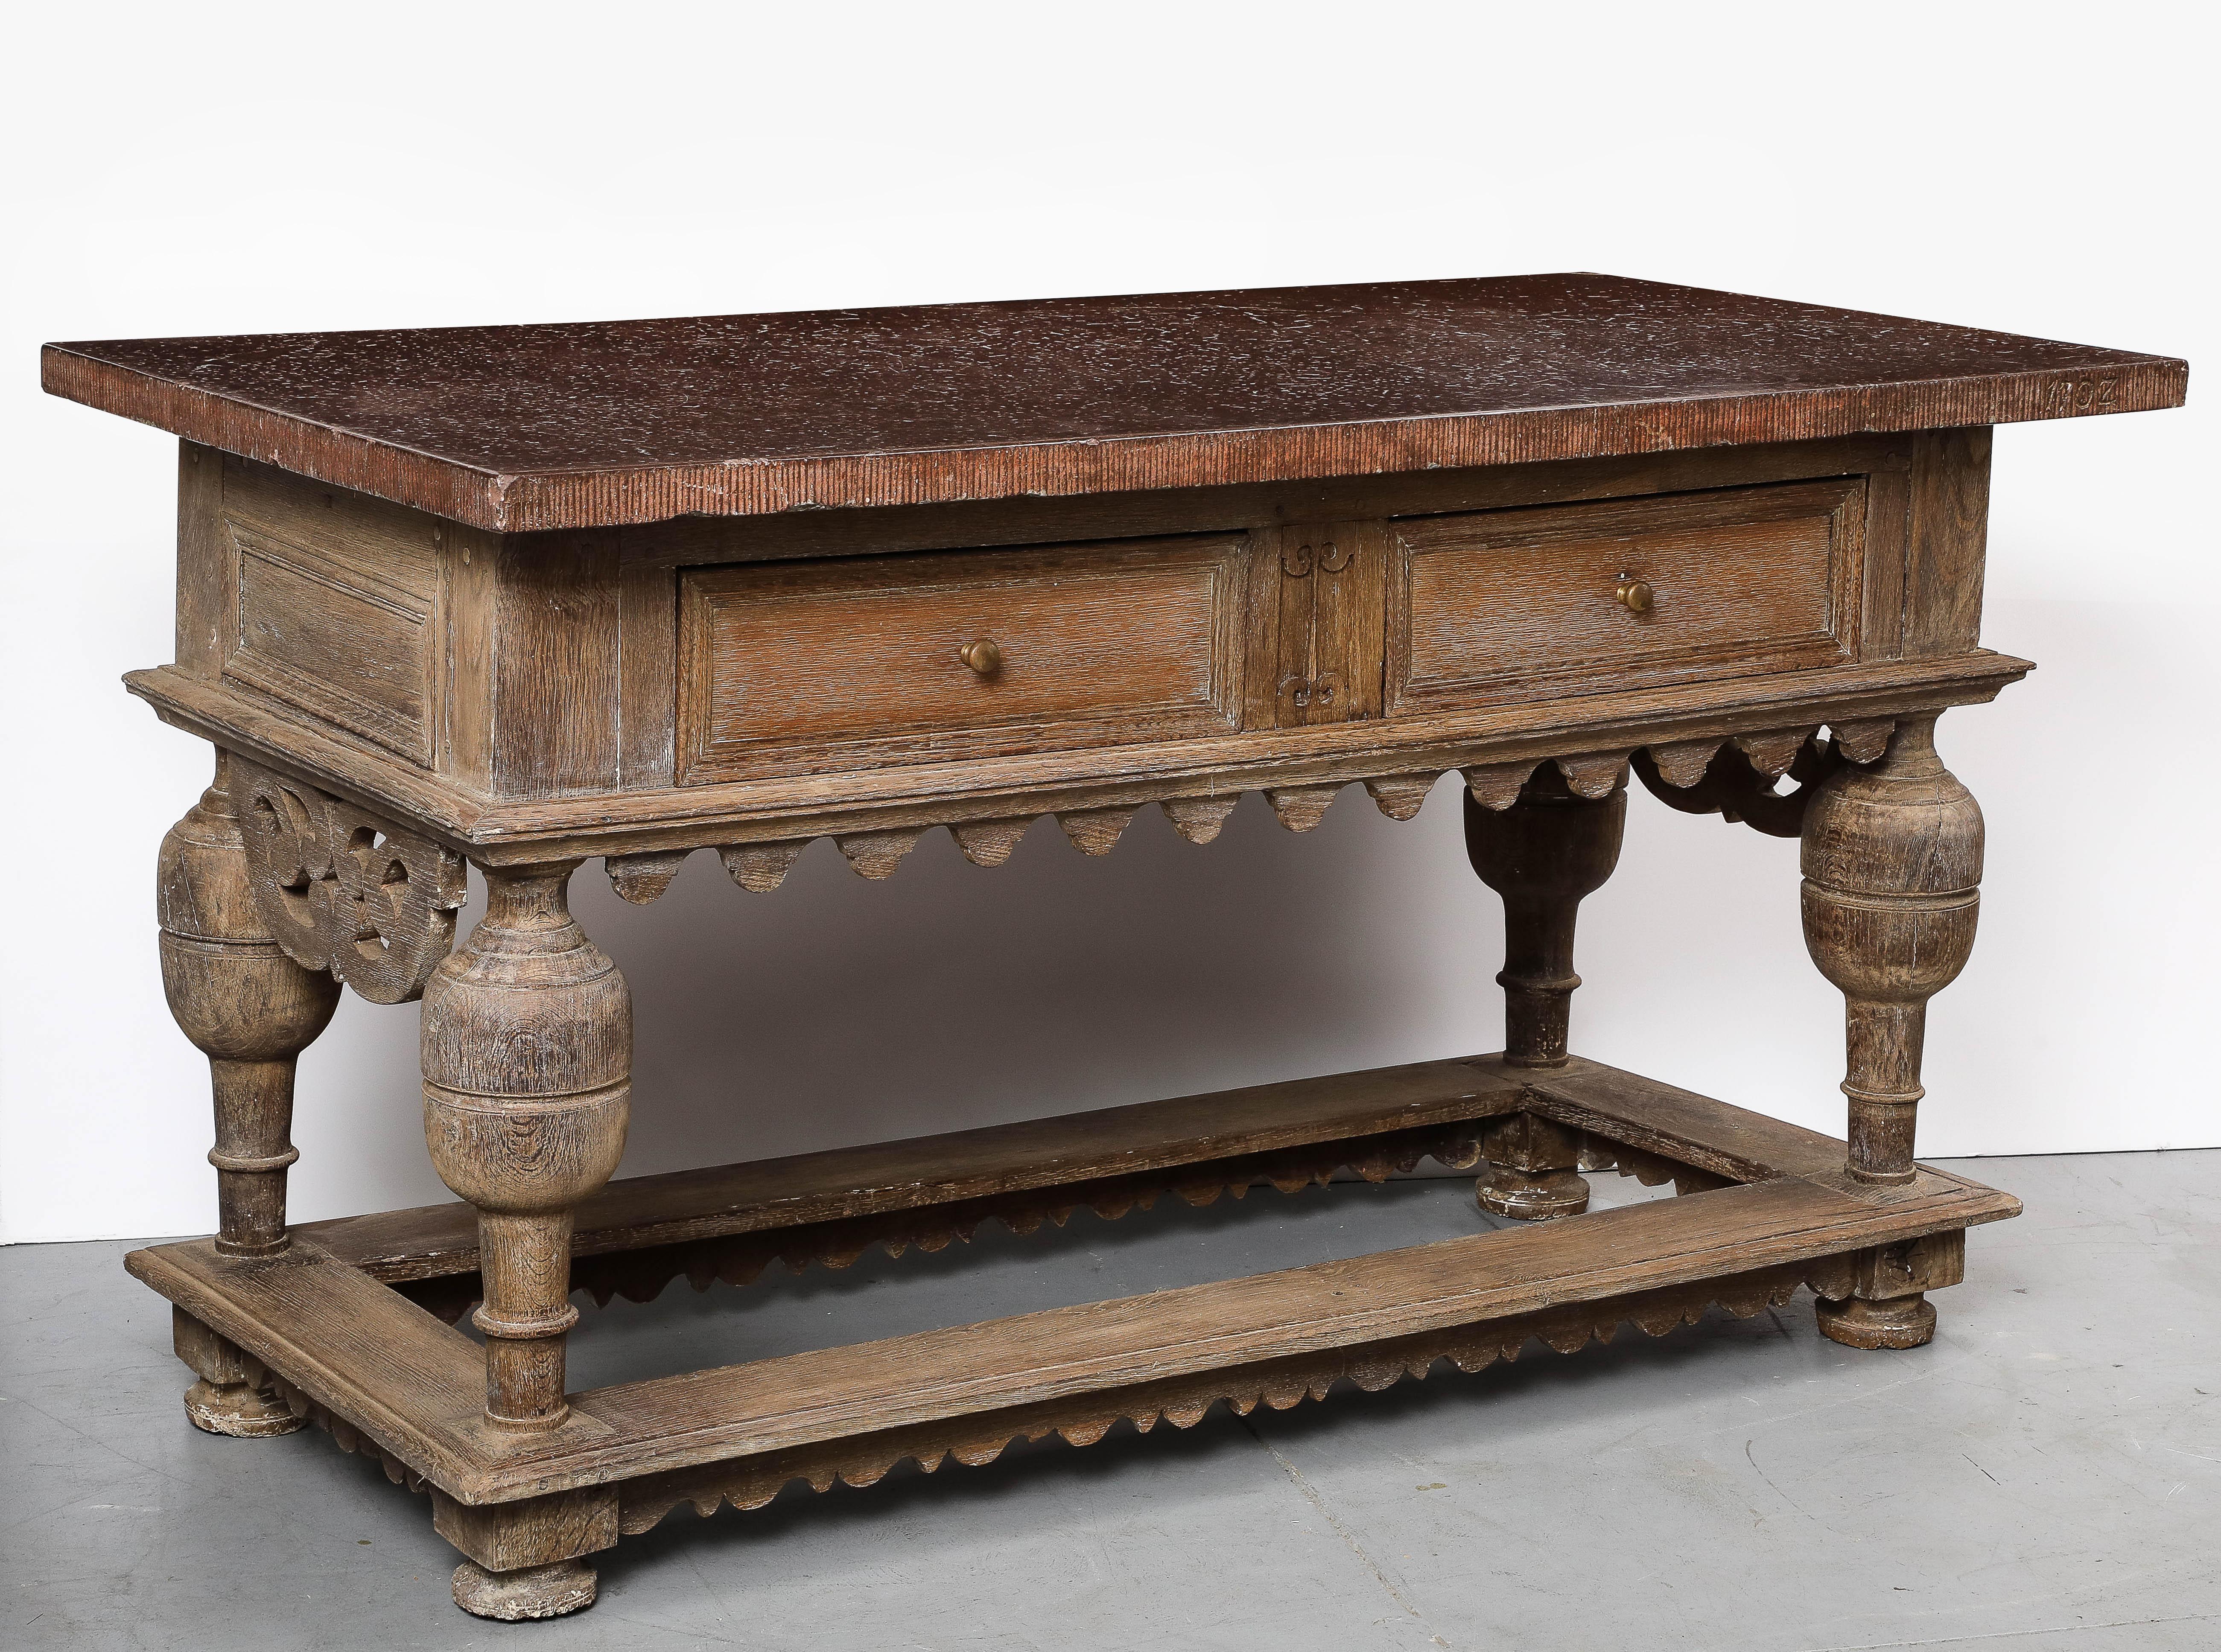 The stone, the table size, quality and patina and condition.